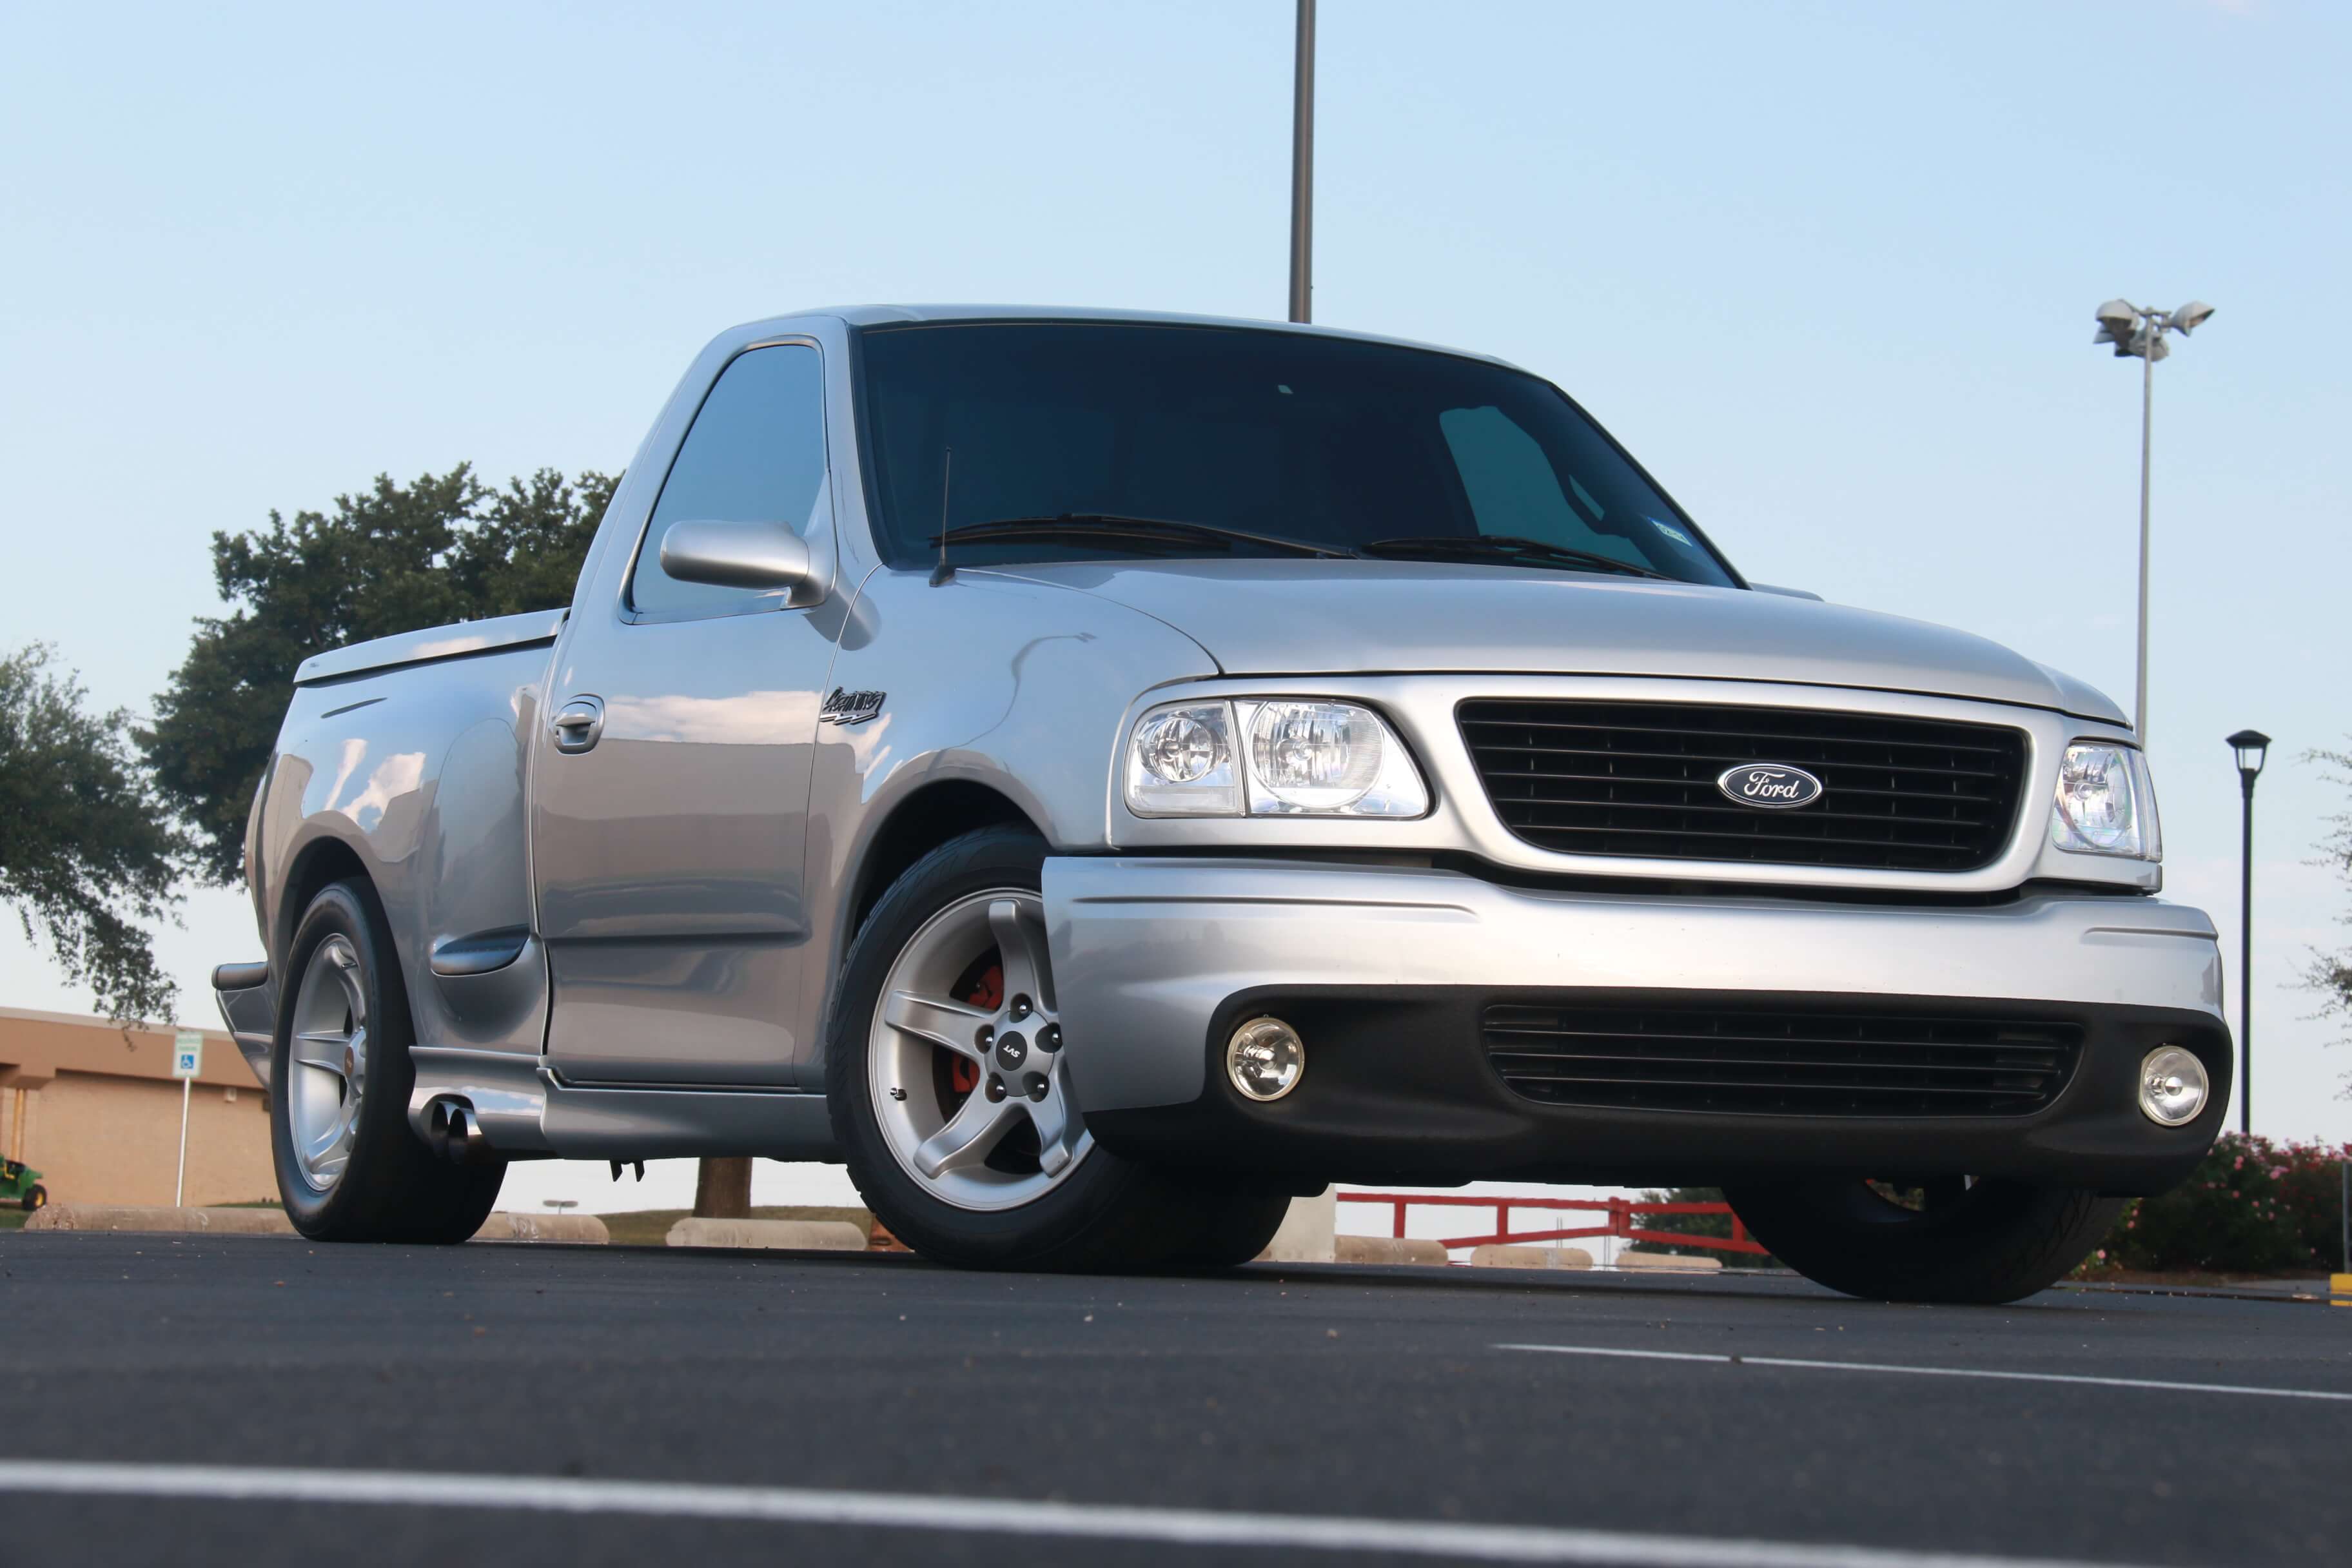 How Much Power Will A 2000 Ford Lightning Make? - How Much Power Will A 2000 Ford Lightning Make?